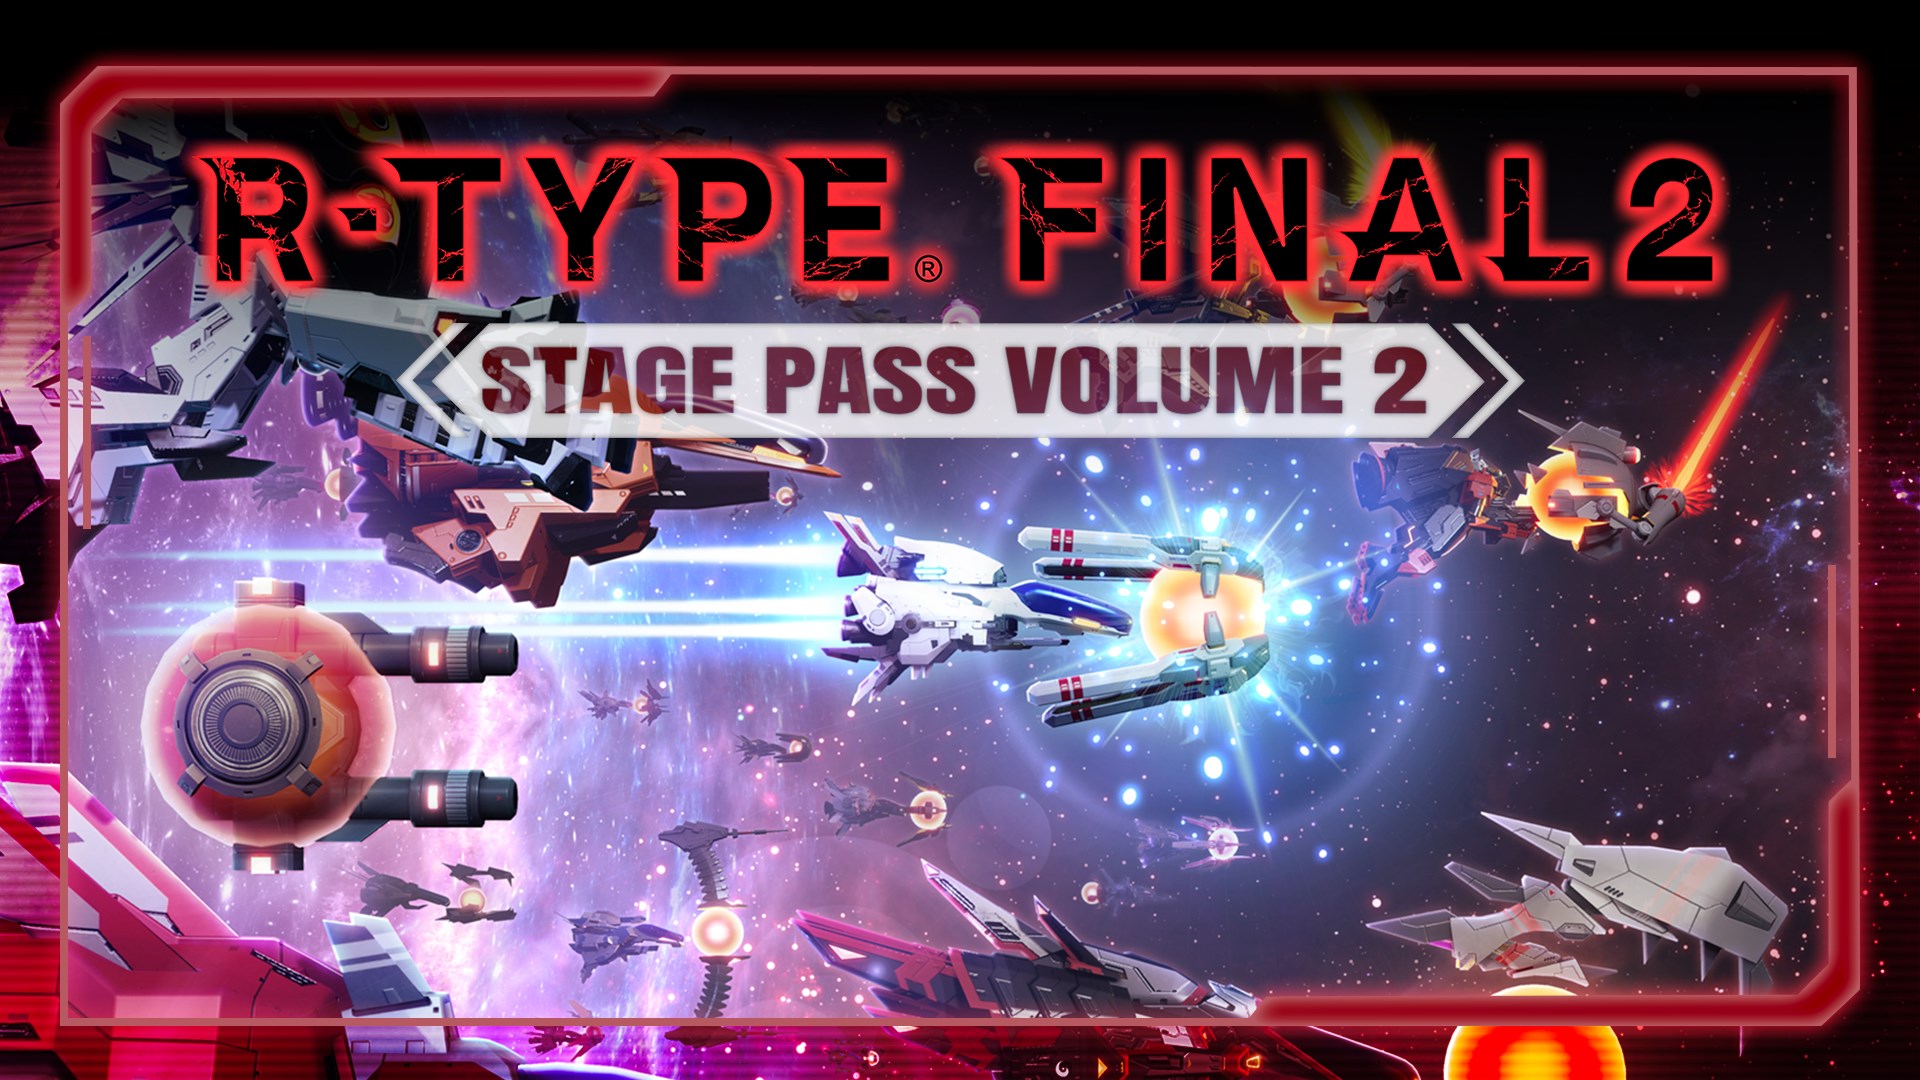 R-Type Final 2 PC: Stage Pass Volume 2